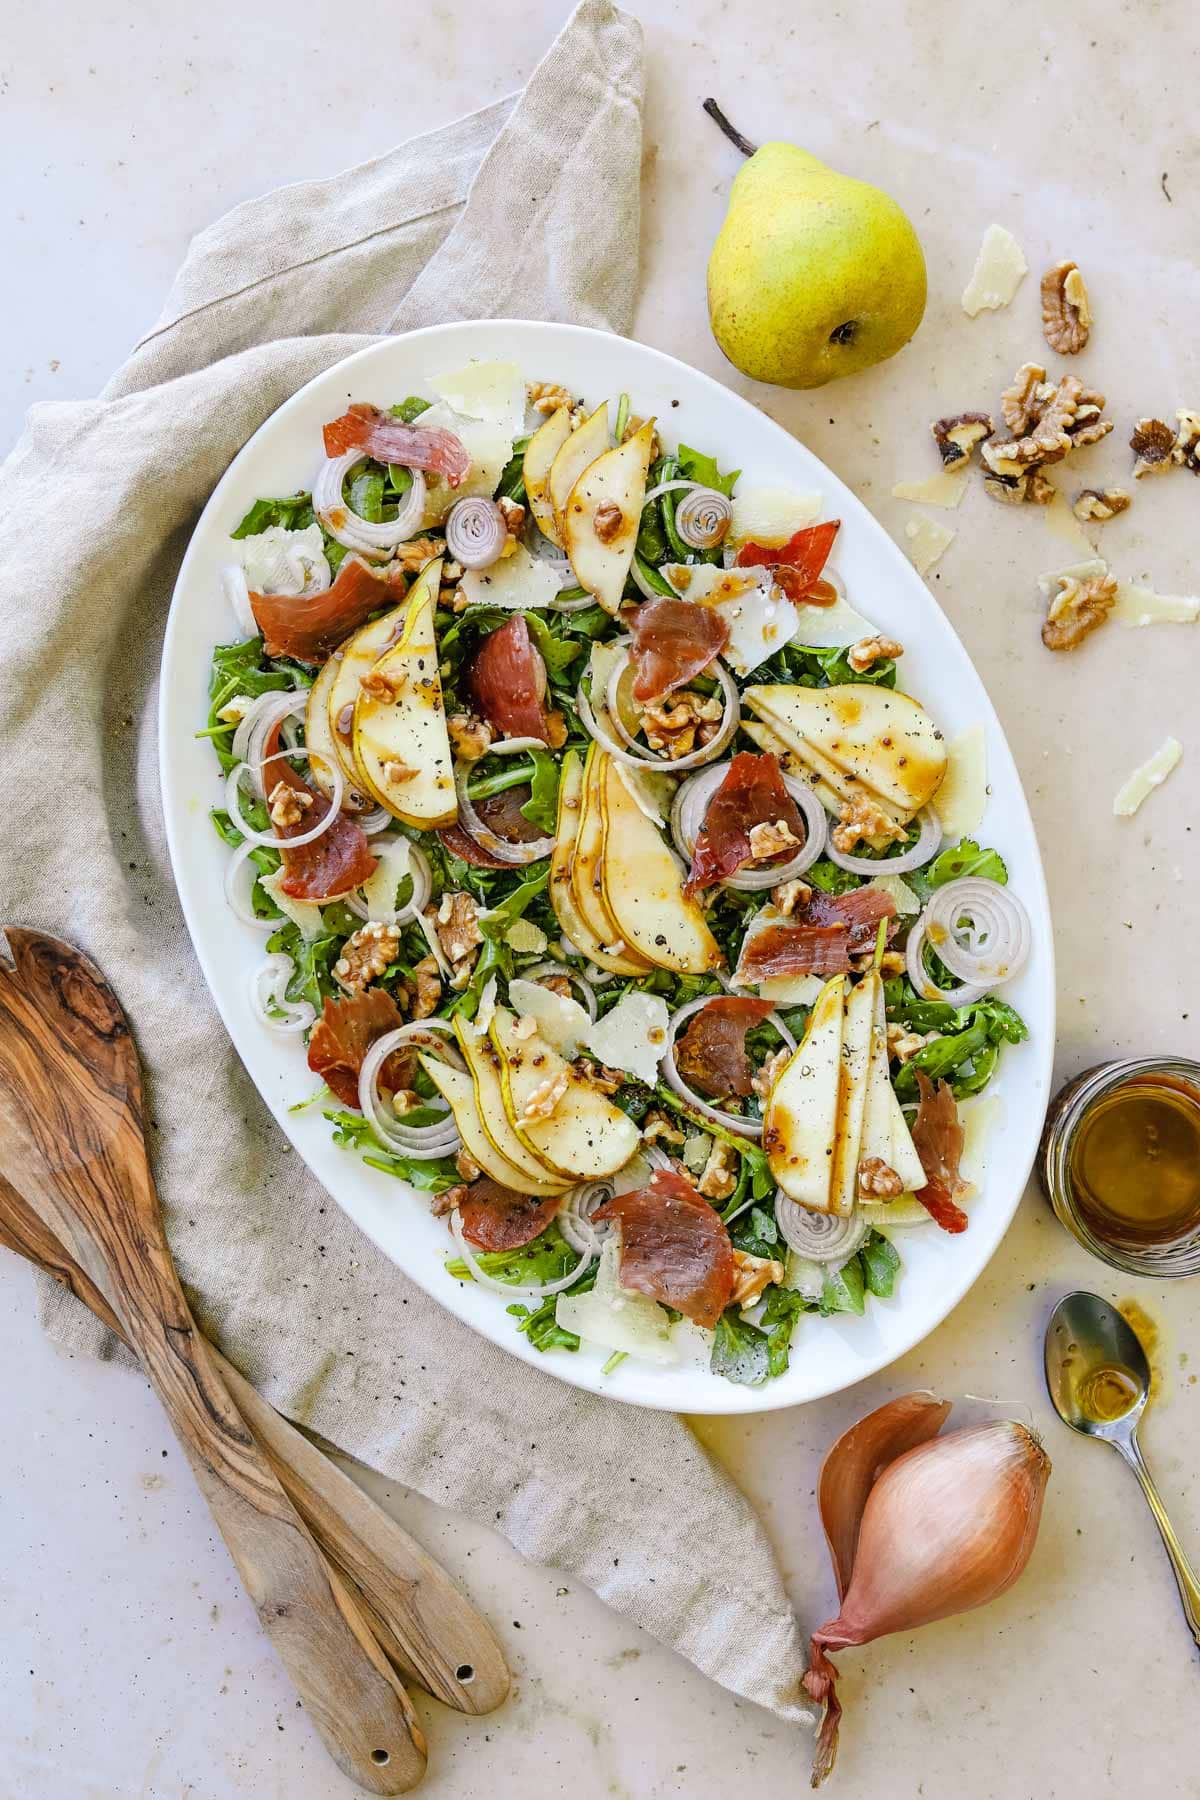 Pear and prosciutto rocket salad on a serving platter with sliced pears, crispy prosciutto, shallots, walnuts, arugula, and a maple balsamic vinaigrette vinaigrette.